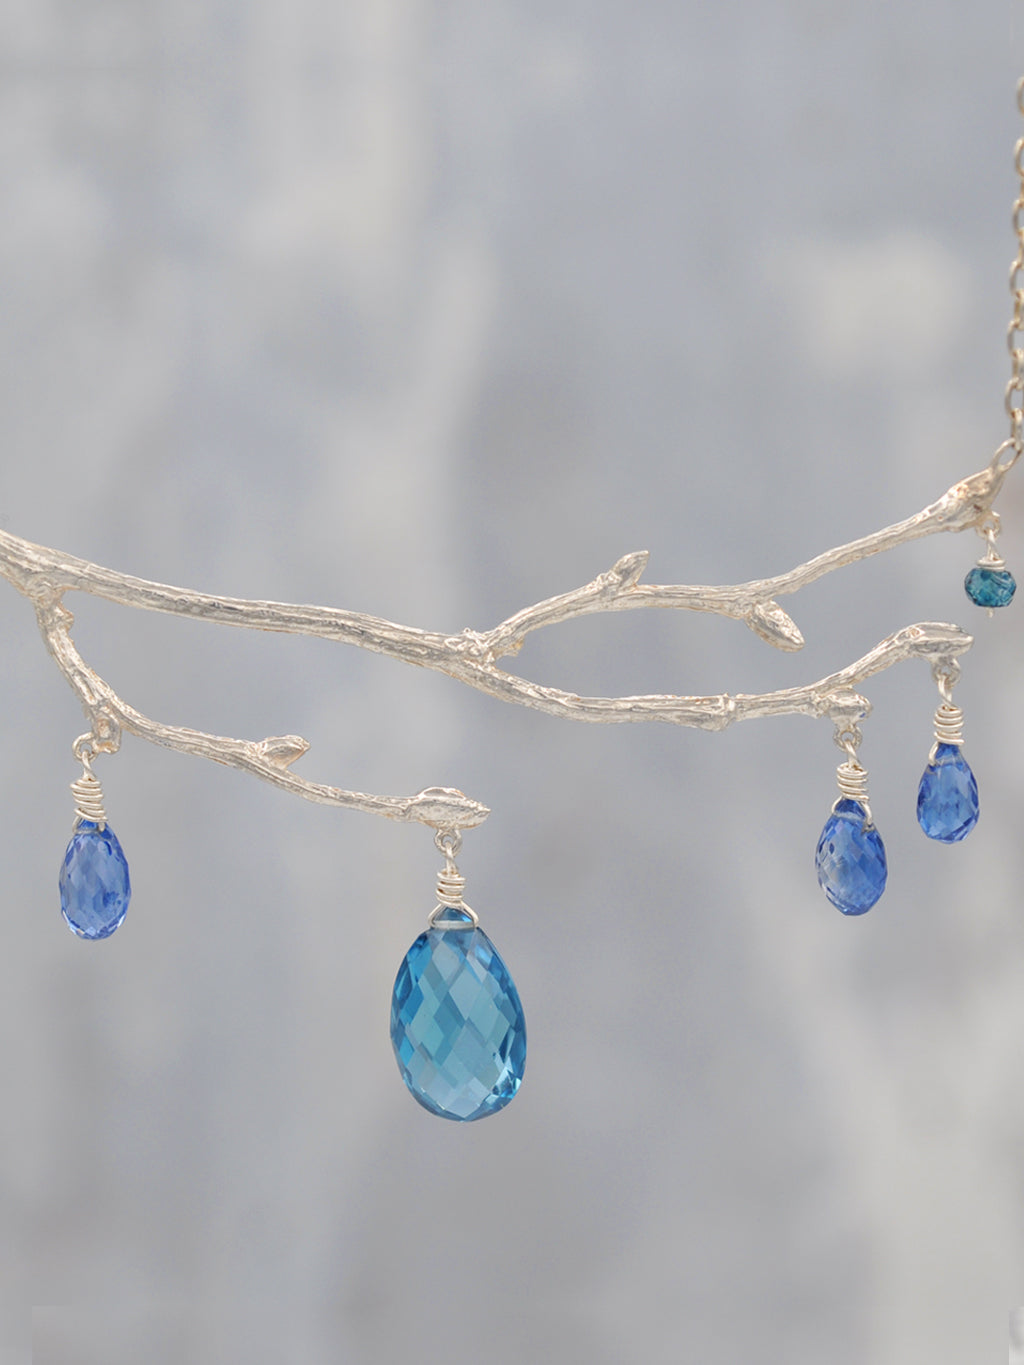 Enchanted London Blue Topaz and Kyanite Fairy Branch Necklace